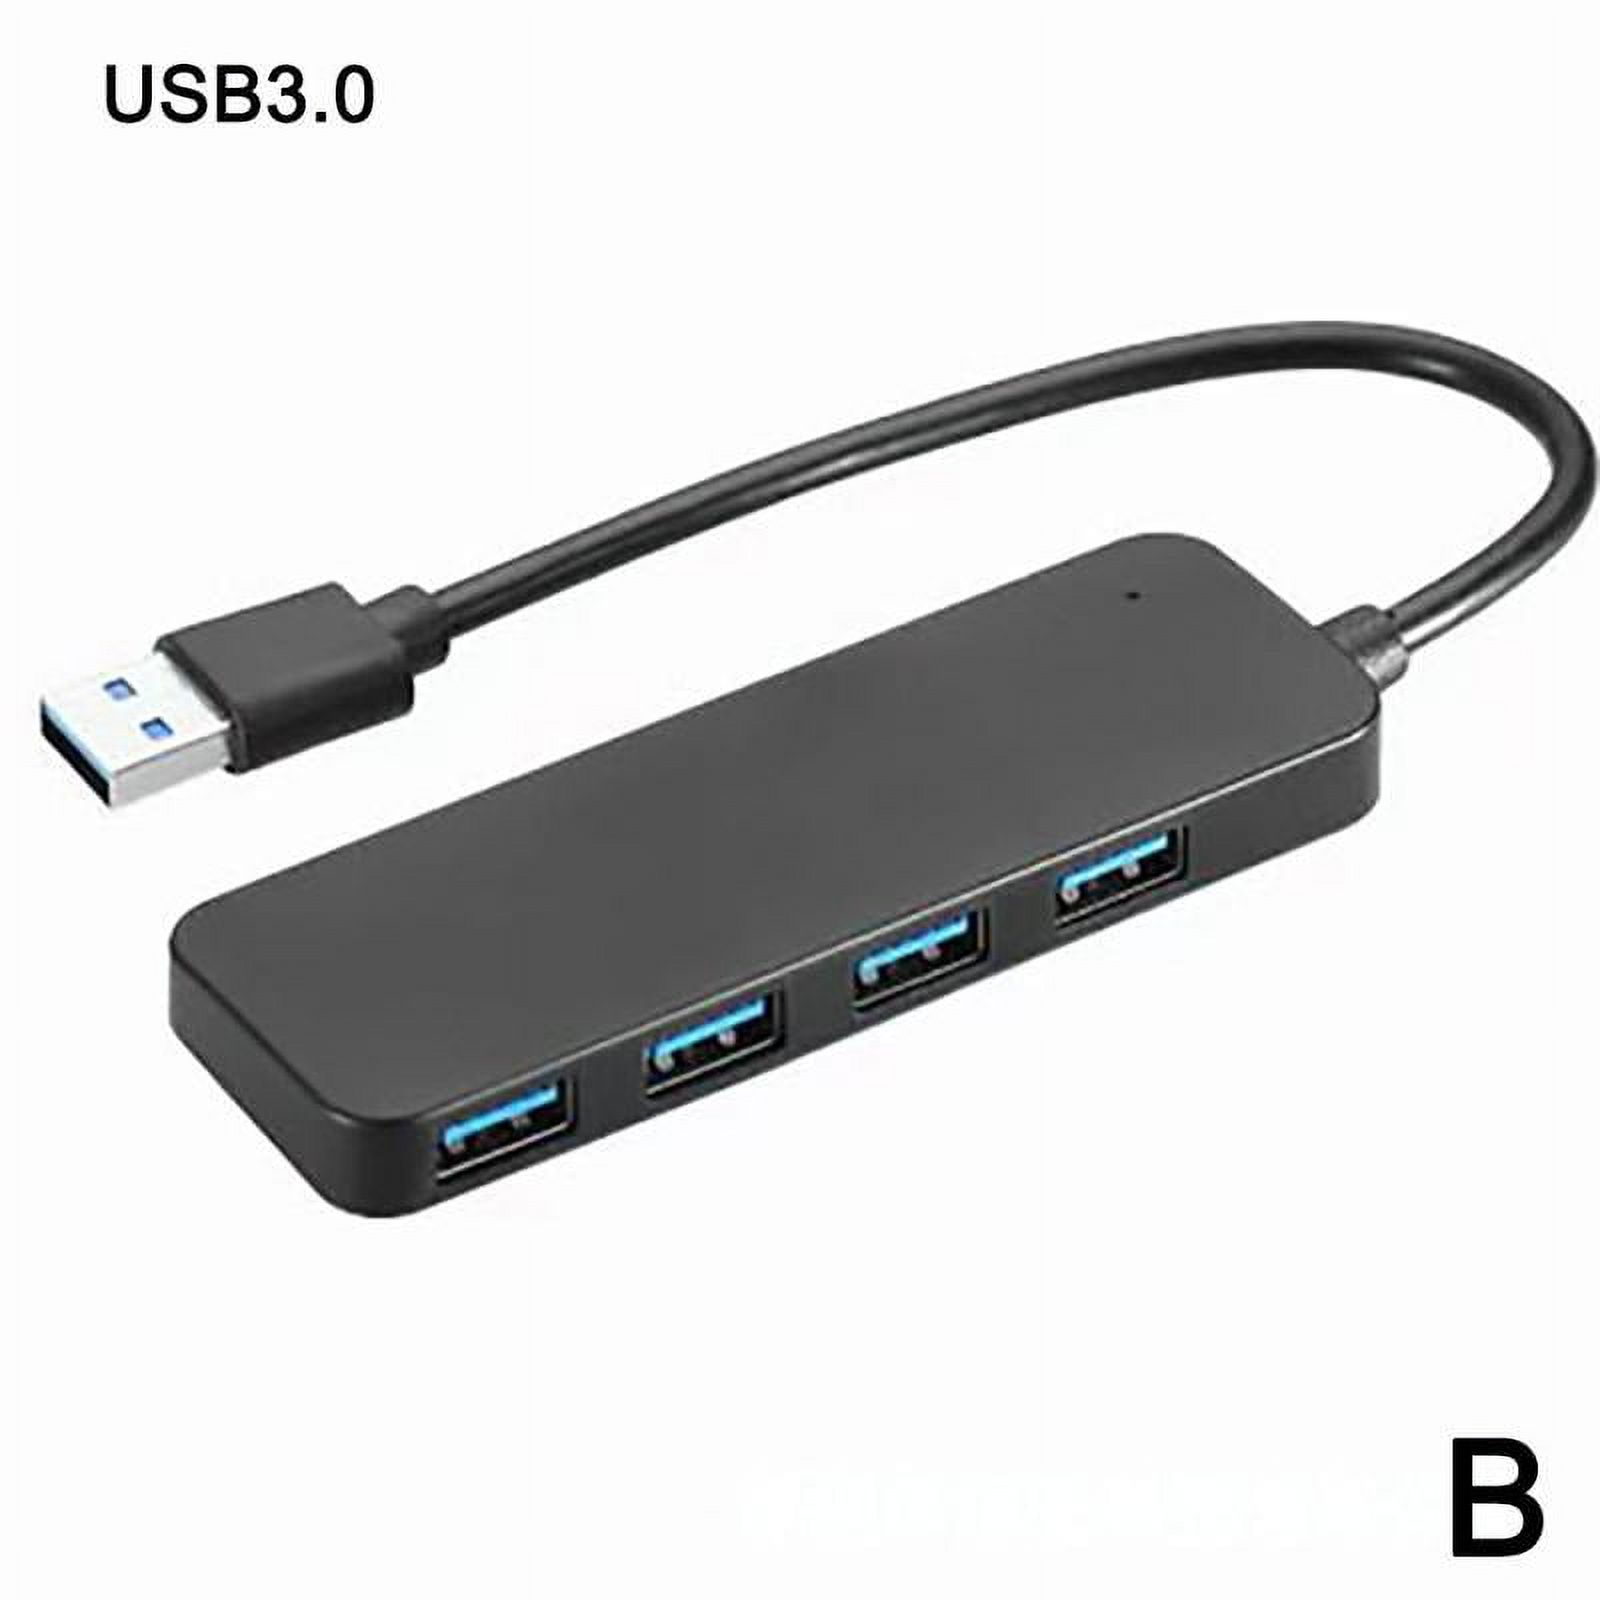 USB2.0/3.0HUB 4-port 3.0 Hub One-to-four Extender High-speed Hot G4Z2 - image 1 of 9